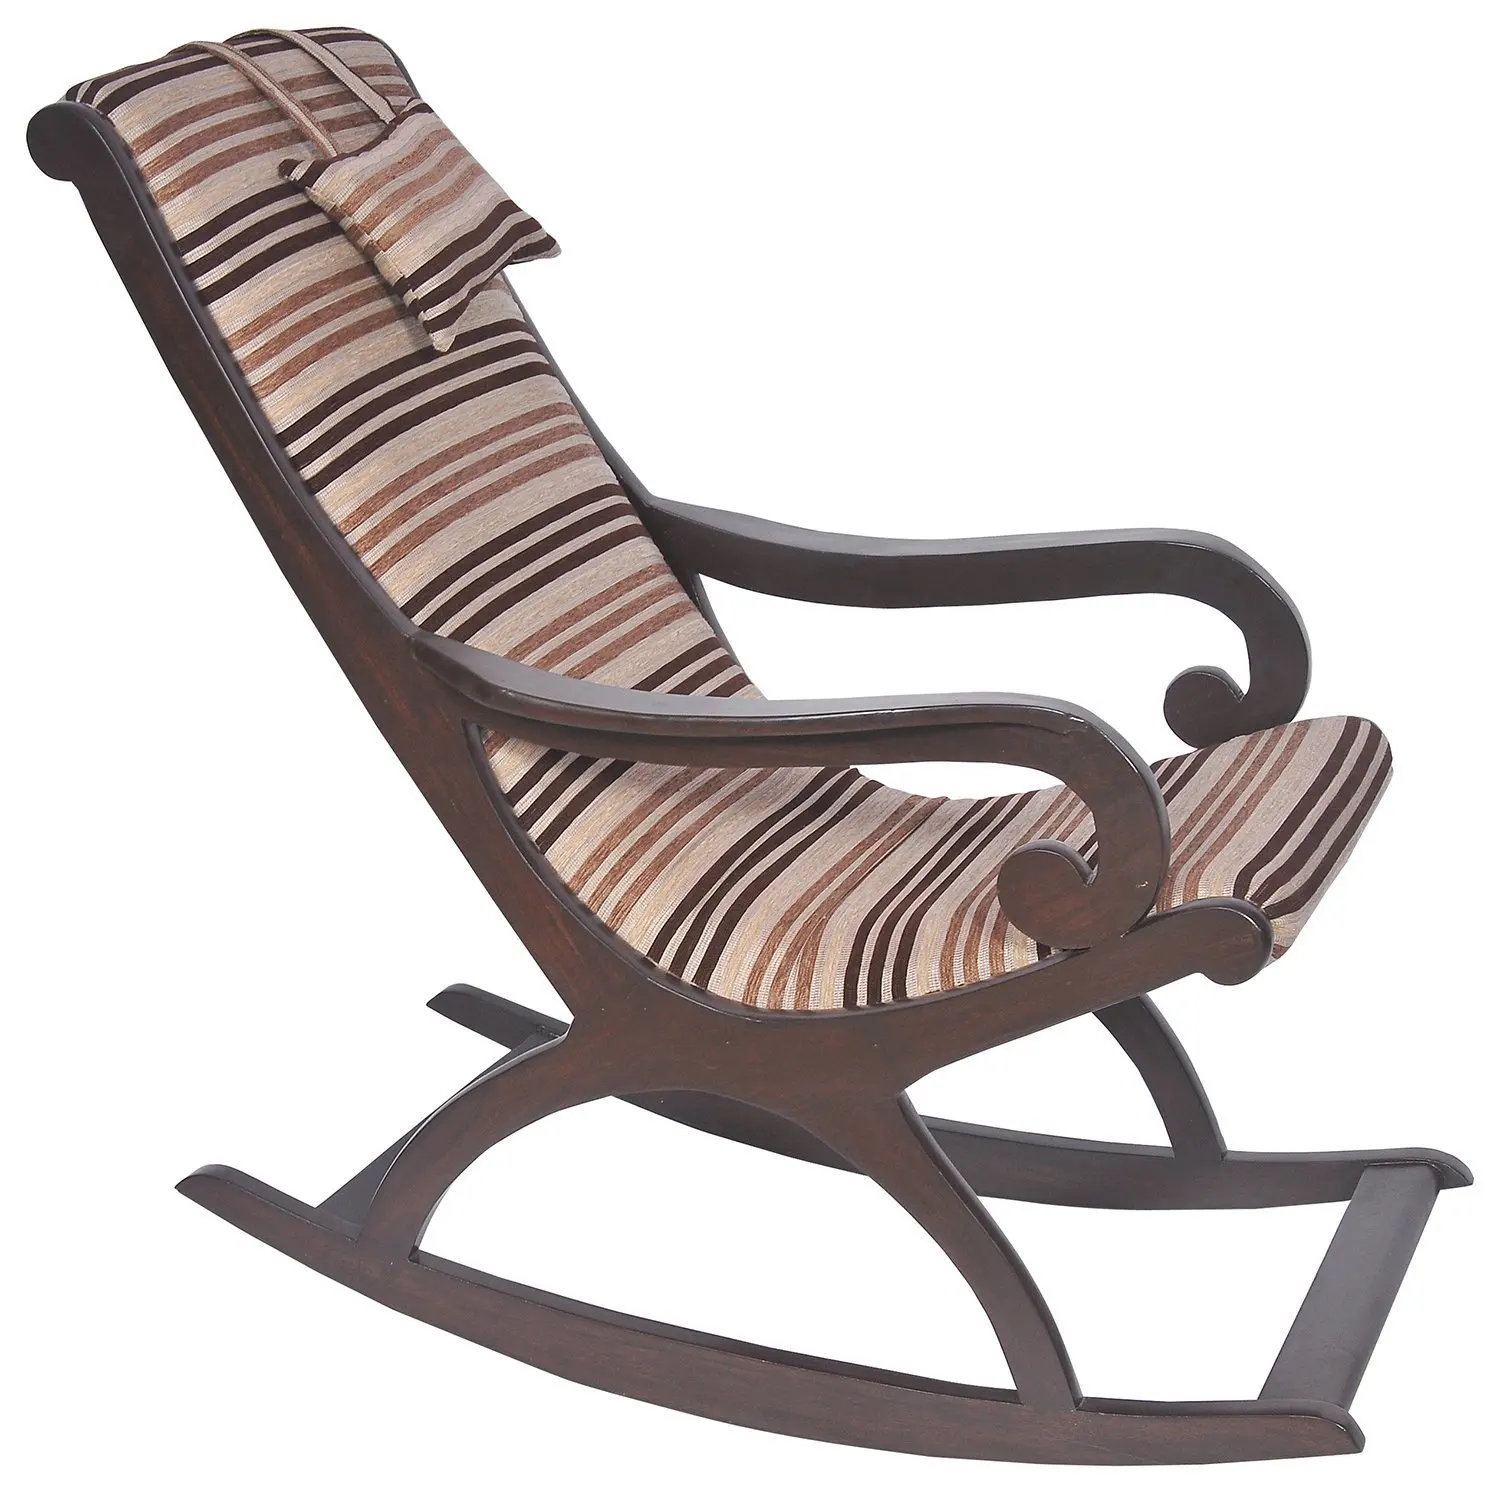 Classic Rocking Chair Walnut Wooden Royal Rocking Chair Wood Rocking Chair Living Room Buy Wooden Chair Cushion Covers Wooden Chair Comfortable C Wood High Chair Wooden Chair Design For Study Table